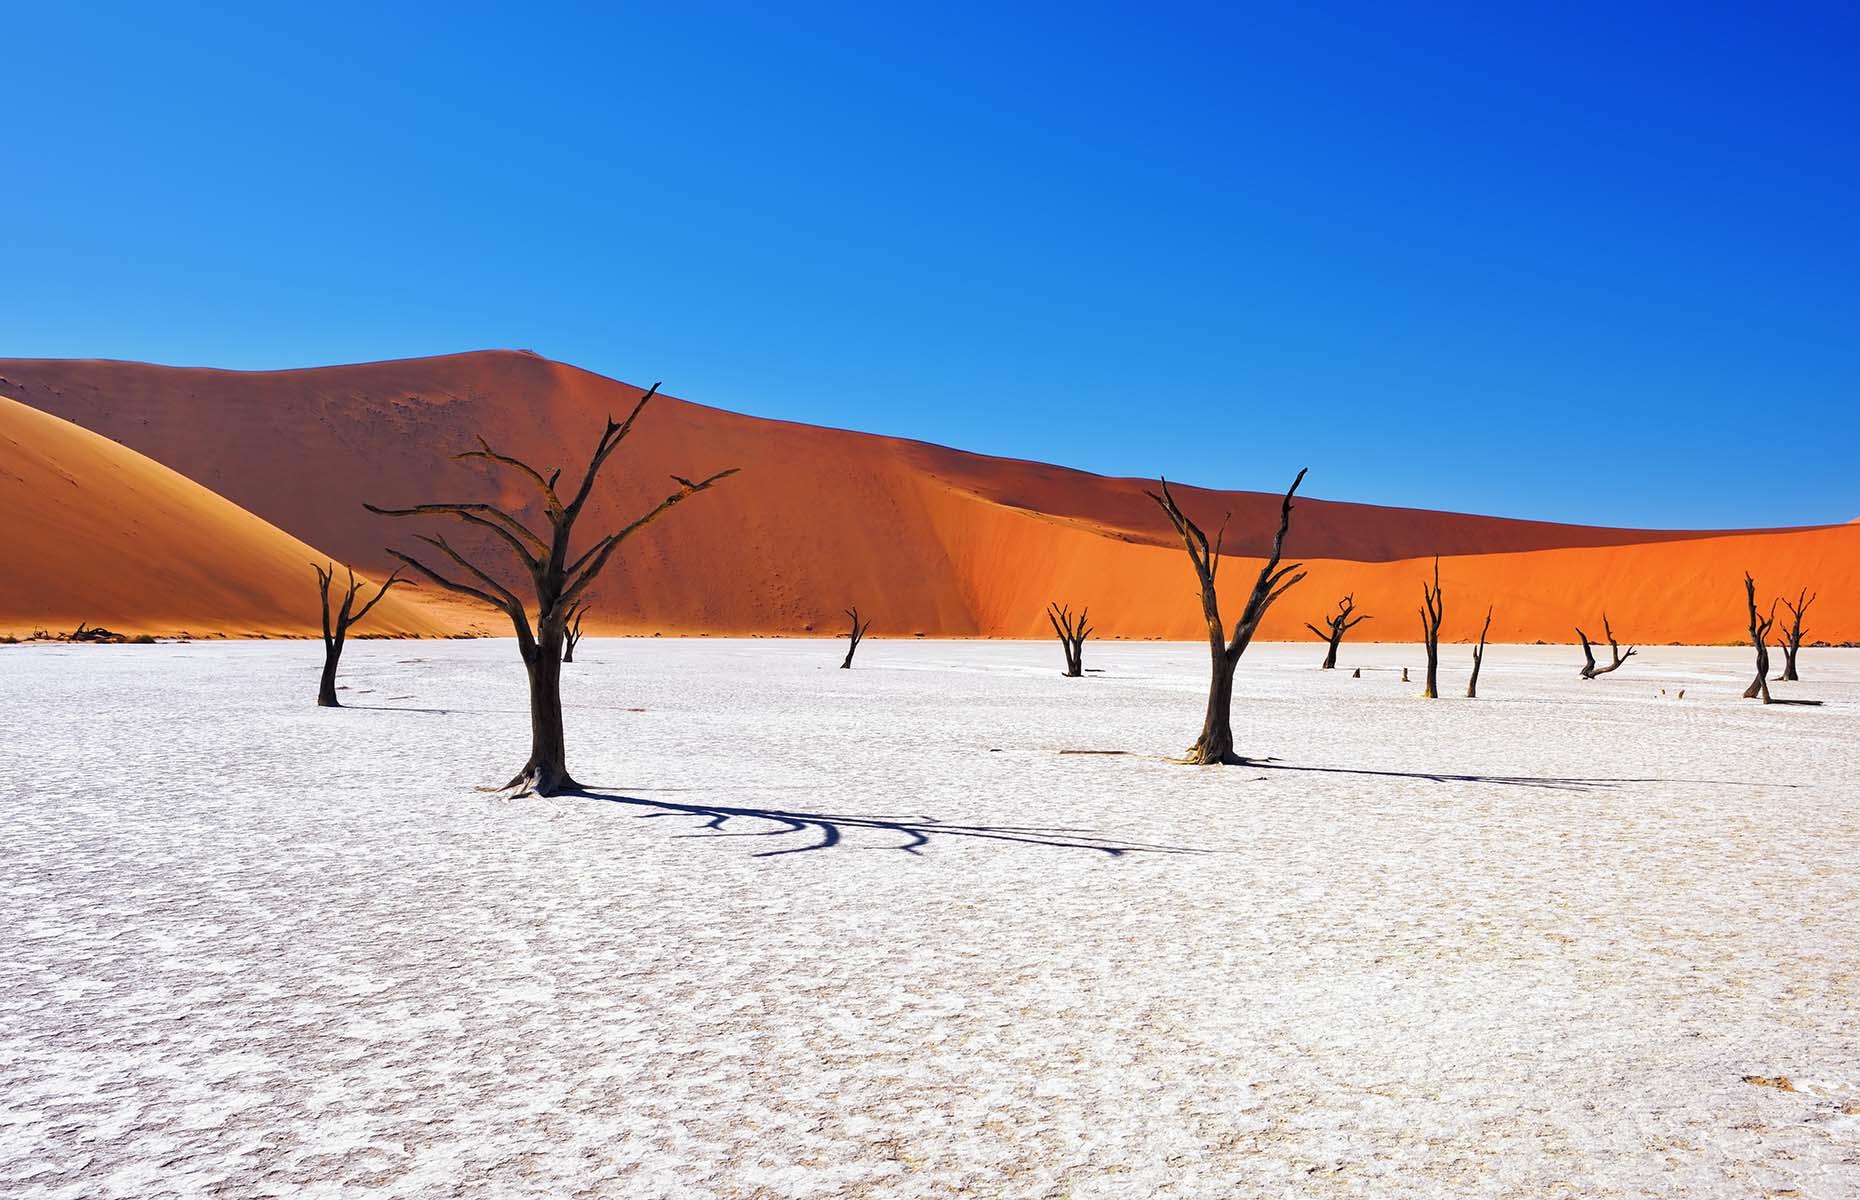 This white salt pan, tucked within the Namib-Naukluft Park, is an otherworldly sight. Dotted with petrified trees and surrounded by rust-red dunes, the dry mineral pan of Deadvlei doesn't look like anywhere else on Earth. The contrasting colours of this landscape are simply breathtaking.